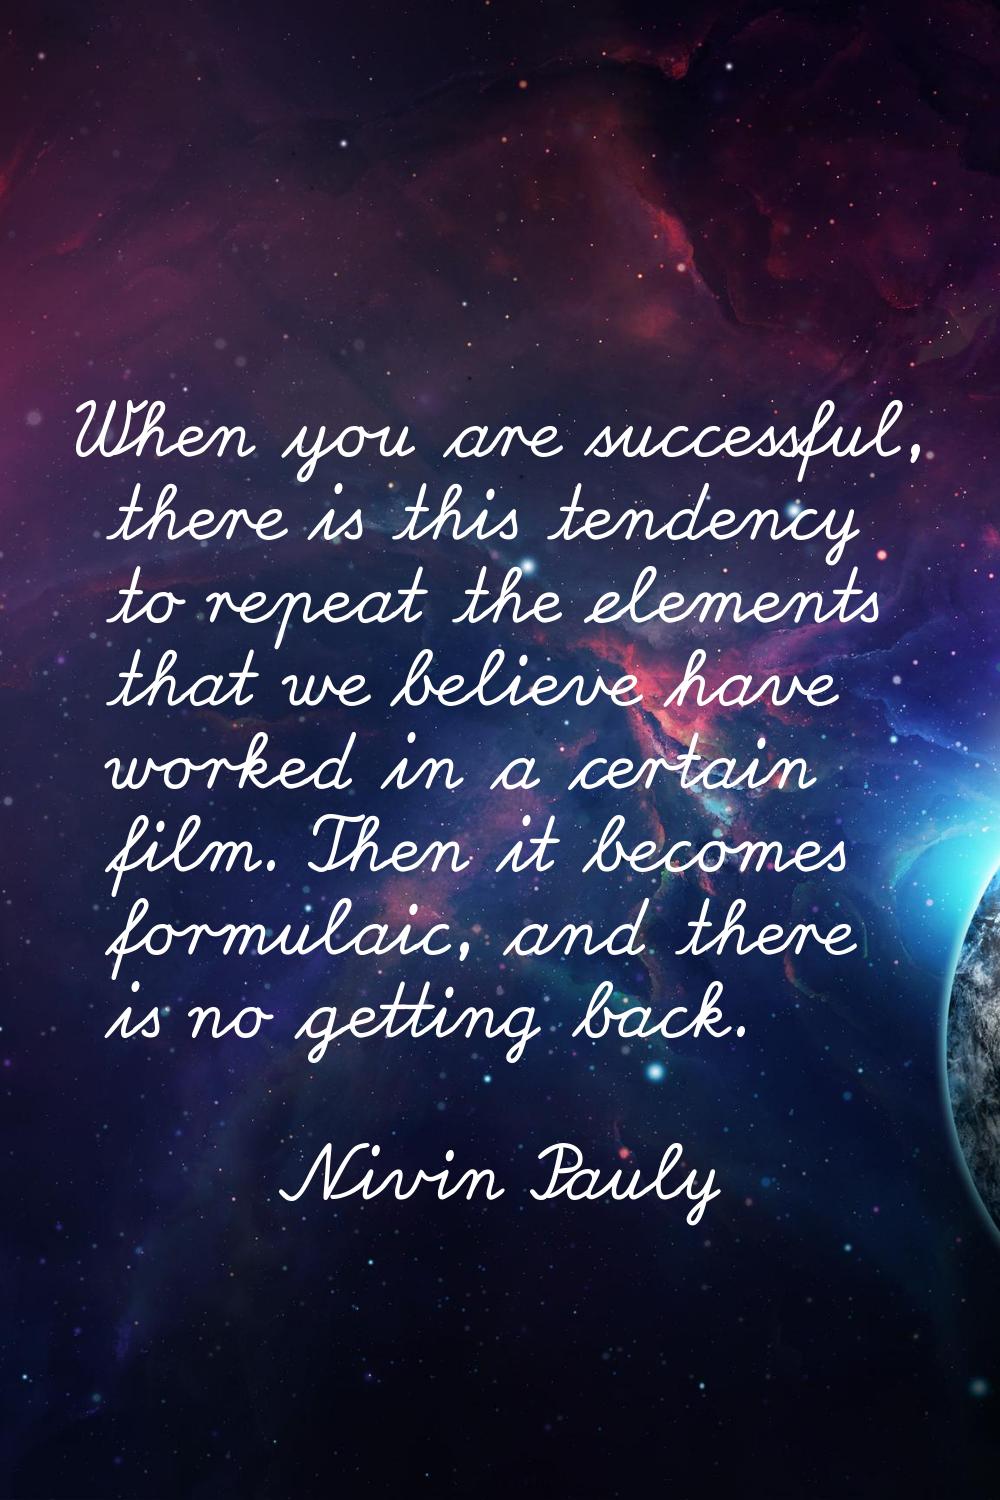 When you are successful, there is this tendency to repeat the elements that we believe have worked 